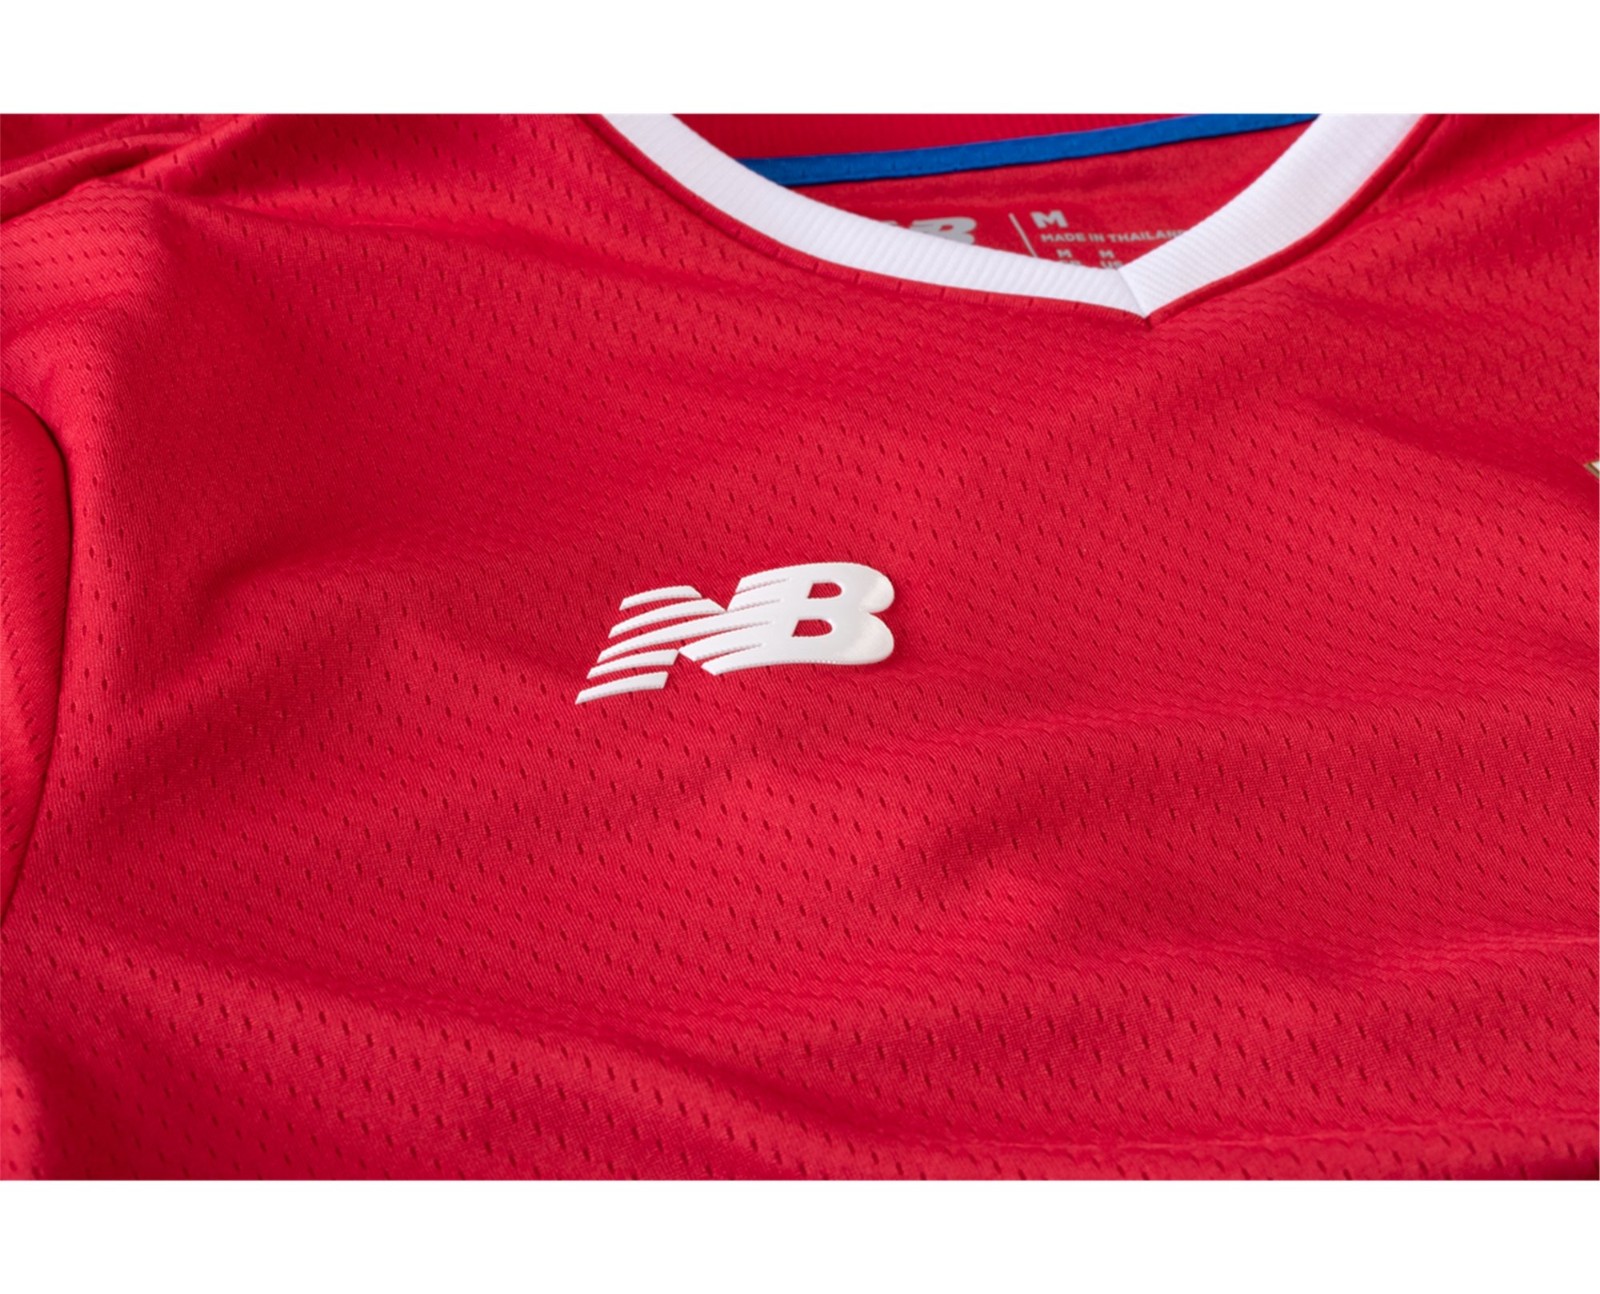 Costa Rica World Cup 2022 Home Kit NB Badge